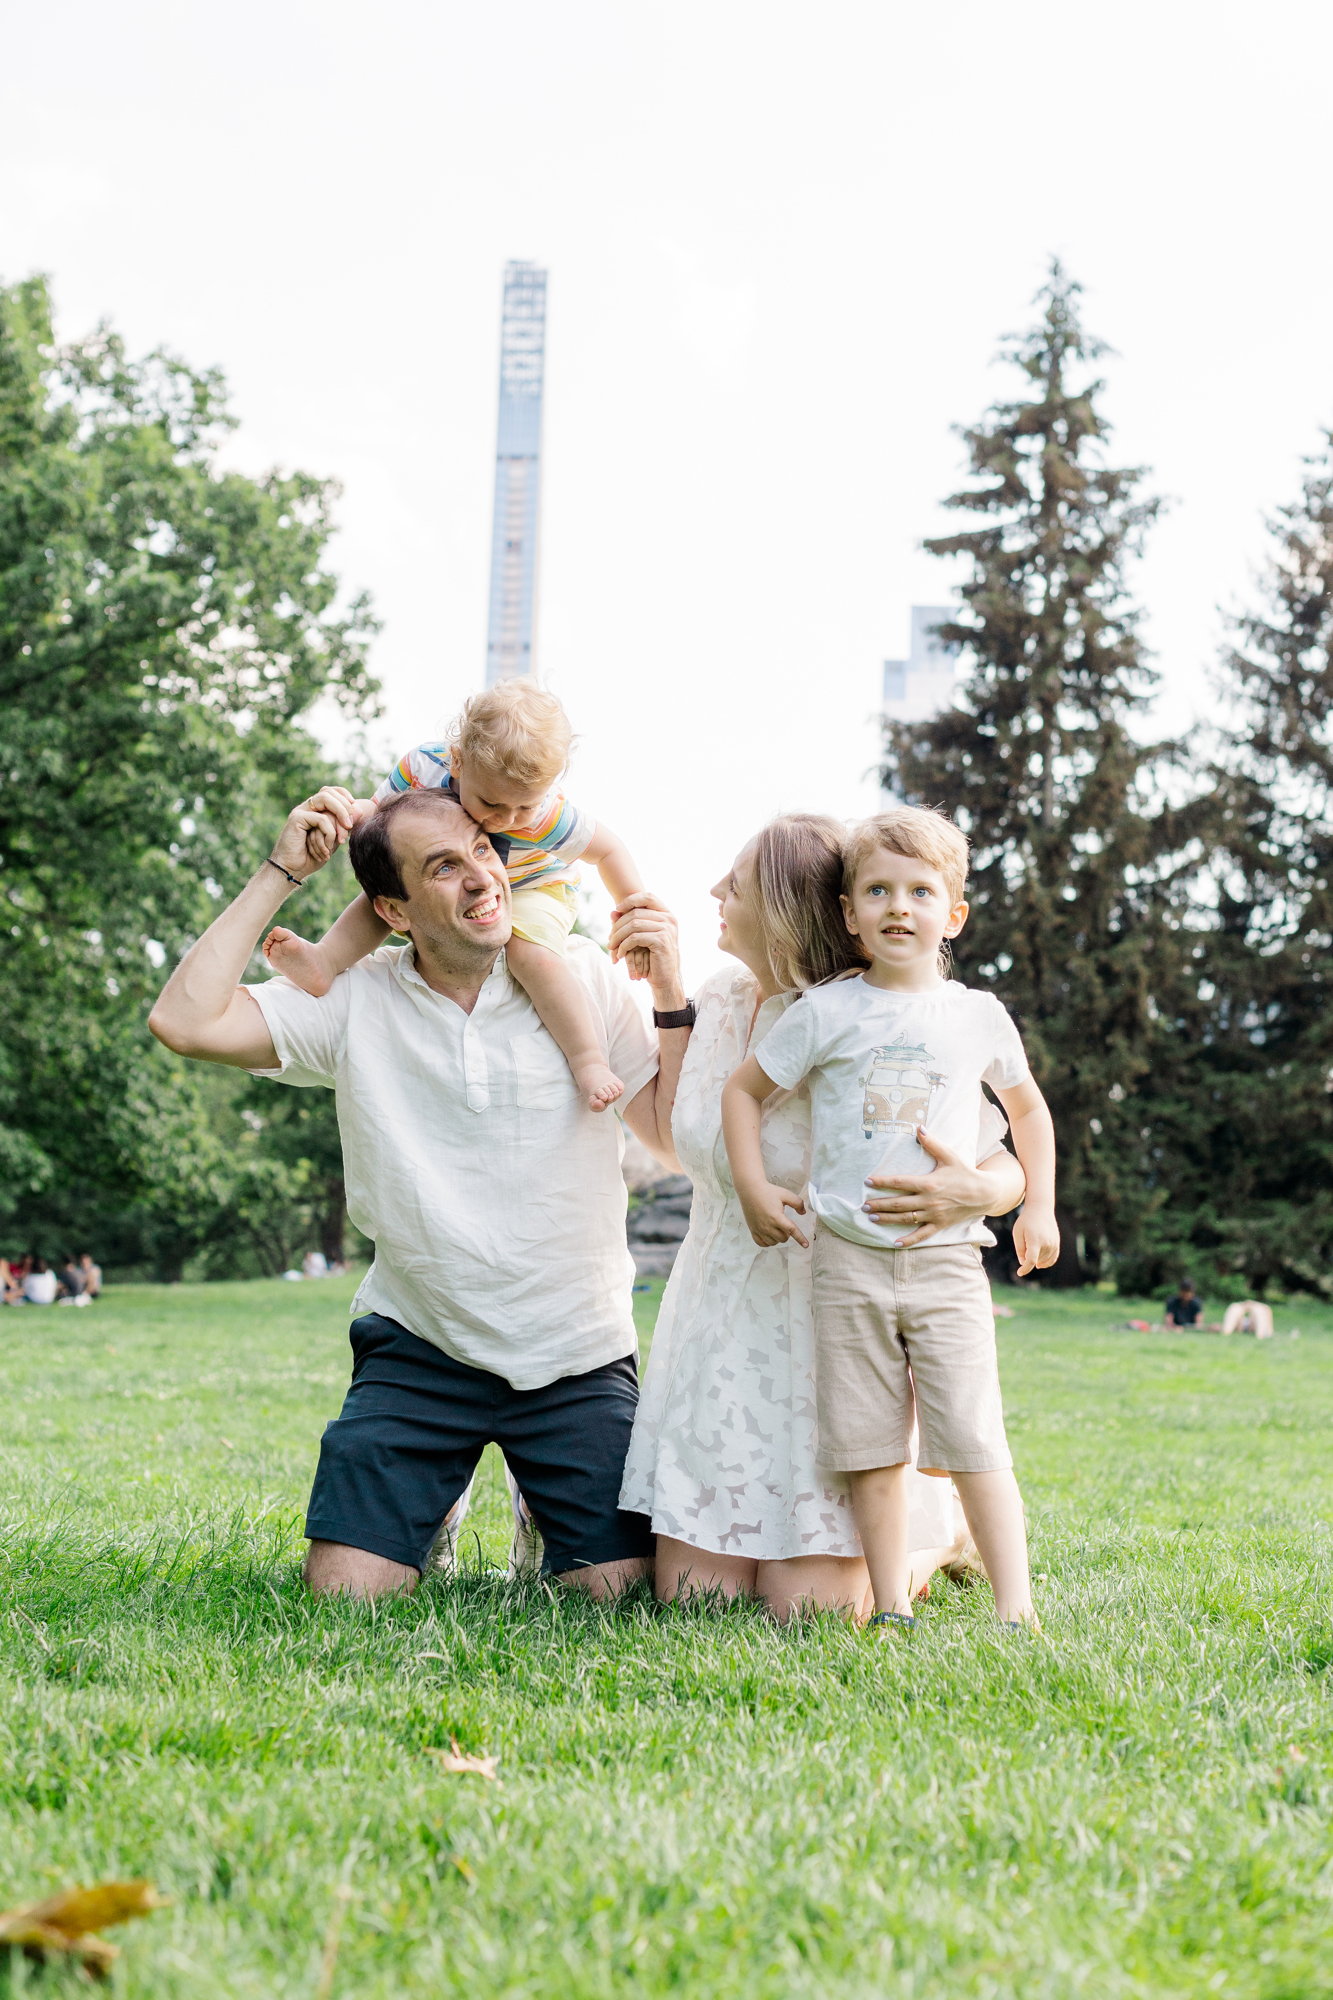 Personal Family Photos in Central Park